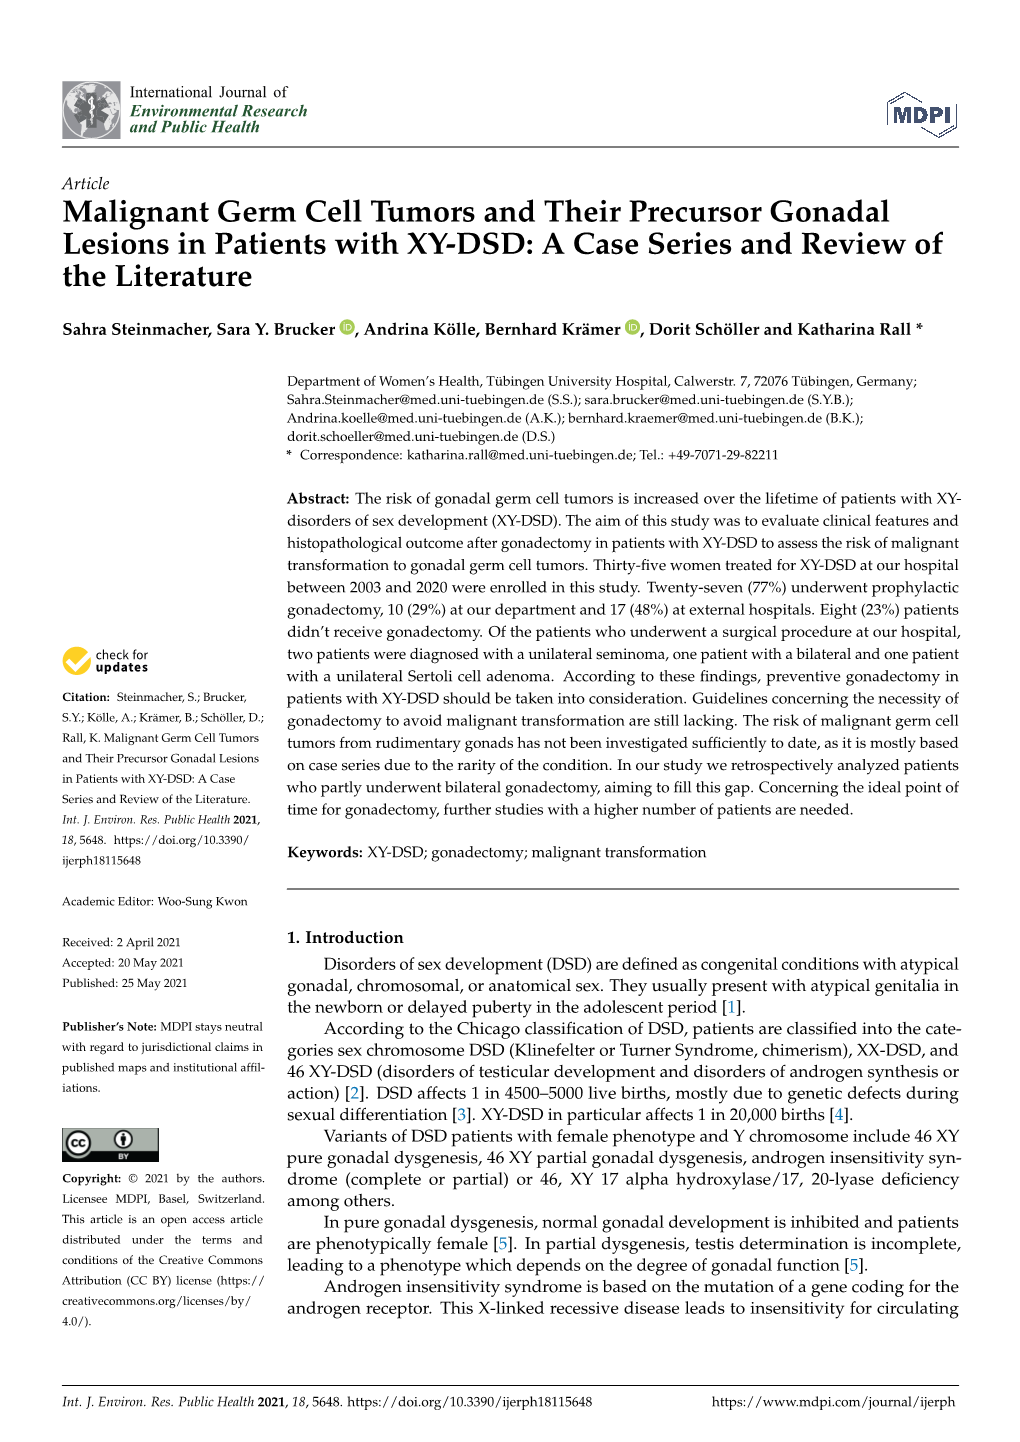 Malignant Germ Cell Tumors and Their Precursor Gonadal Lesions in Patients with XY-DSD: a Case Series and Review of the Literature